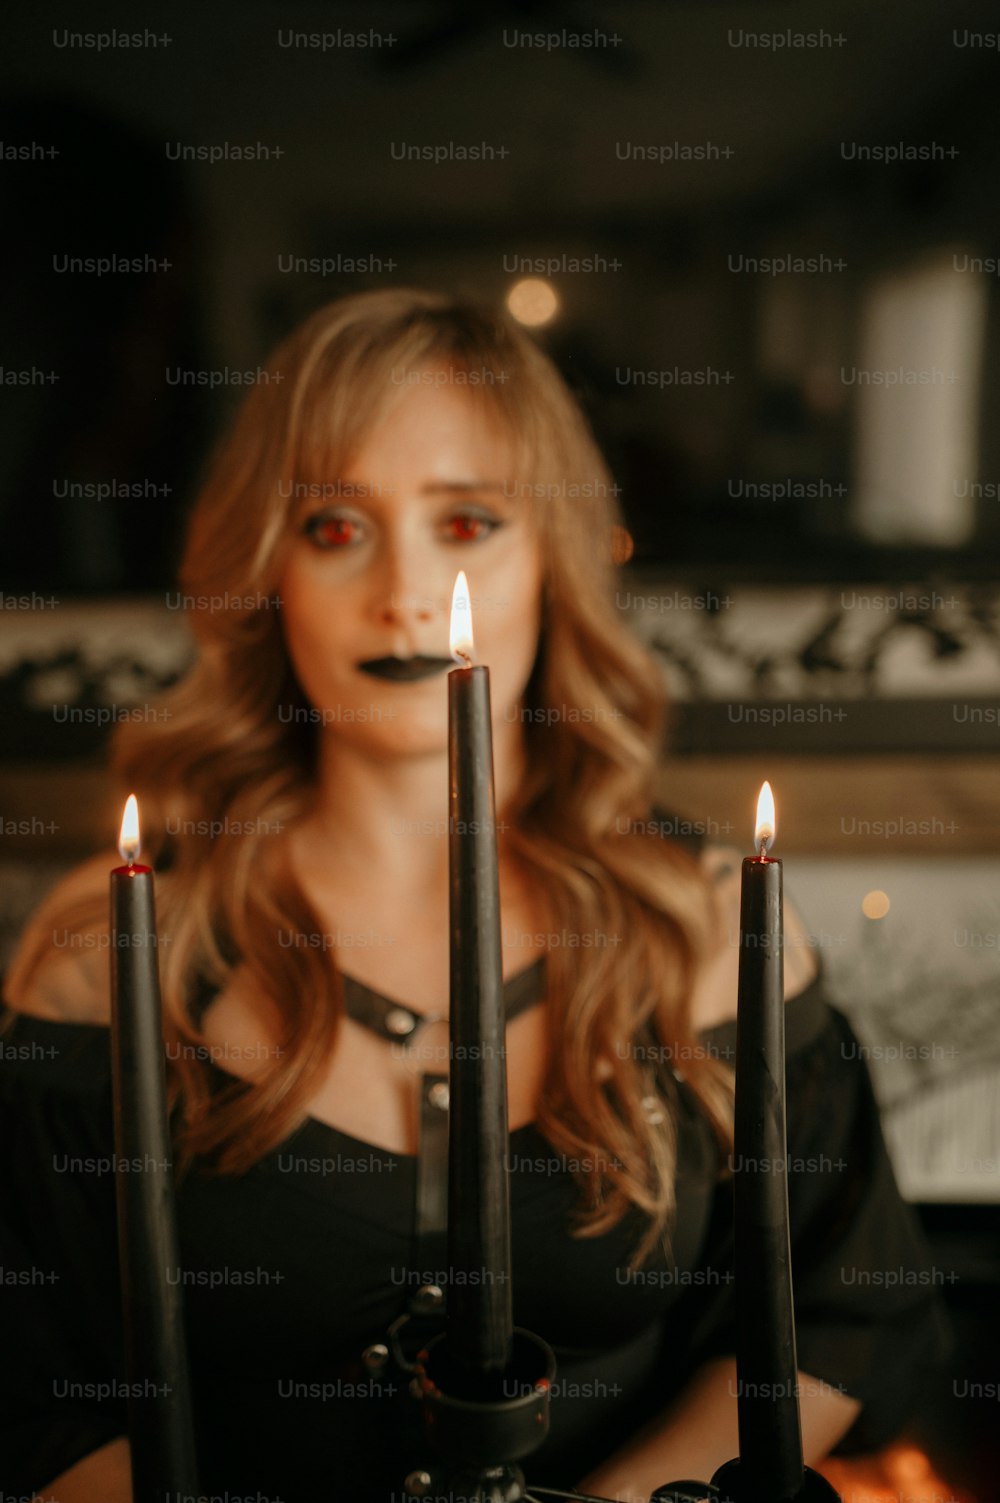 a woman with long hair and black makeup holding three candles